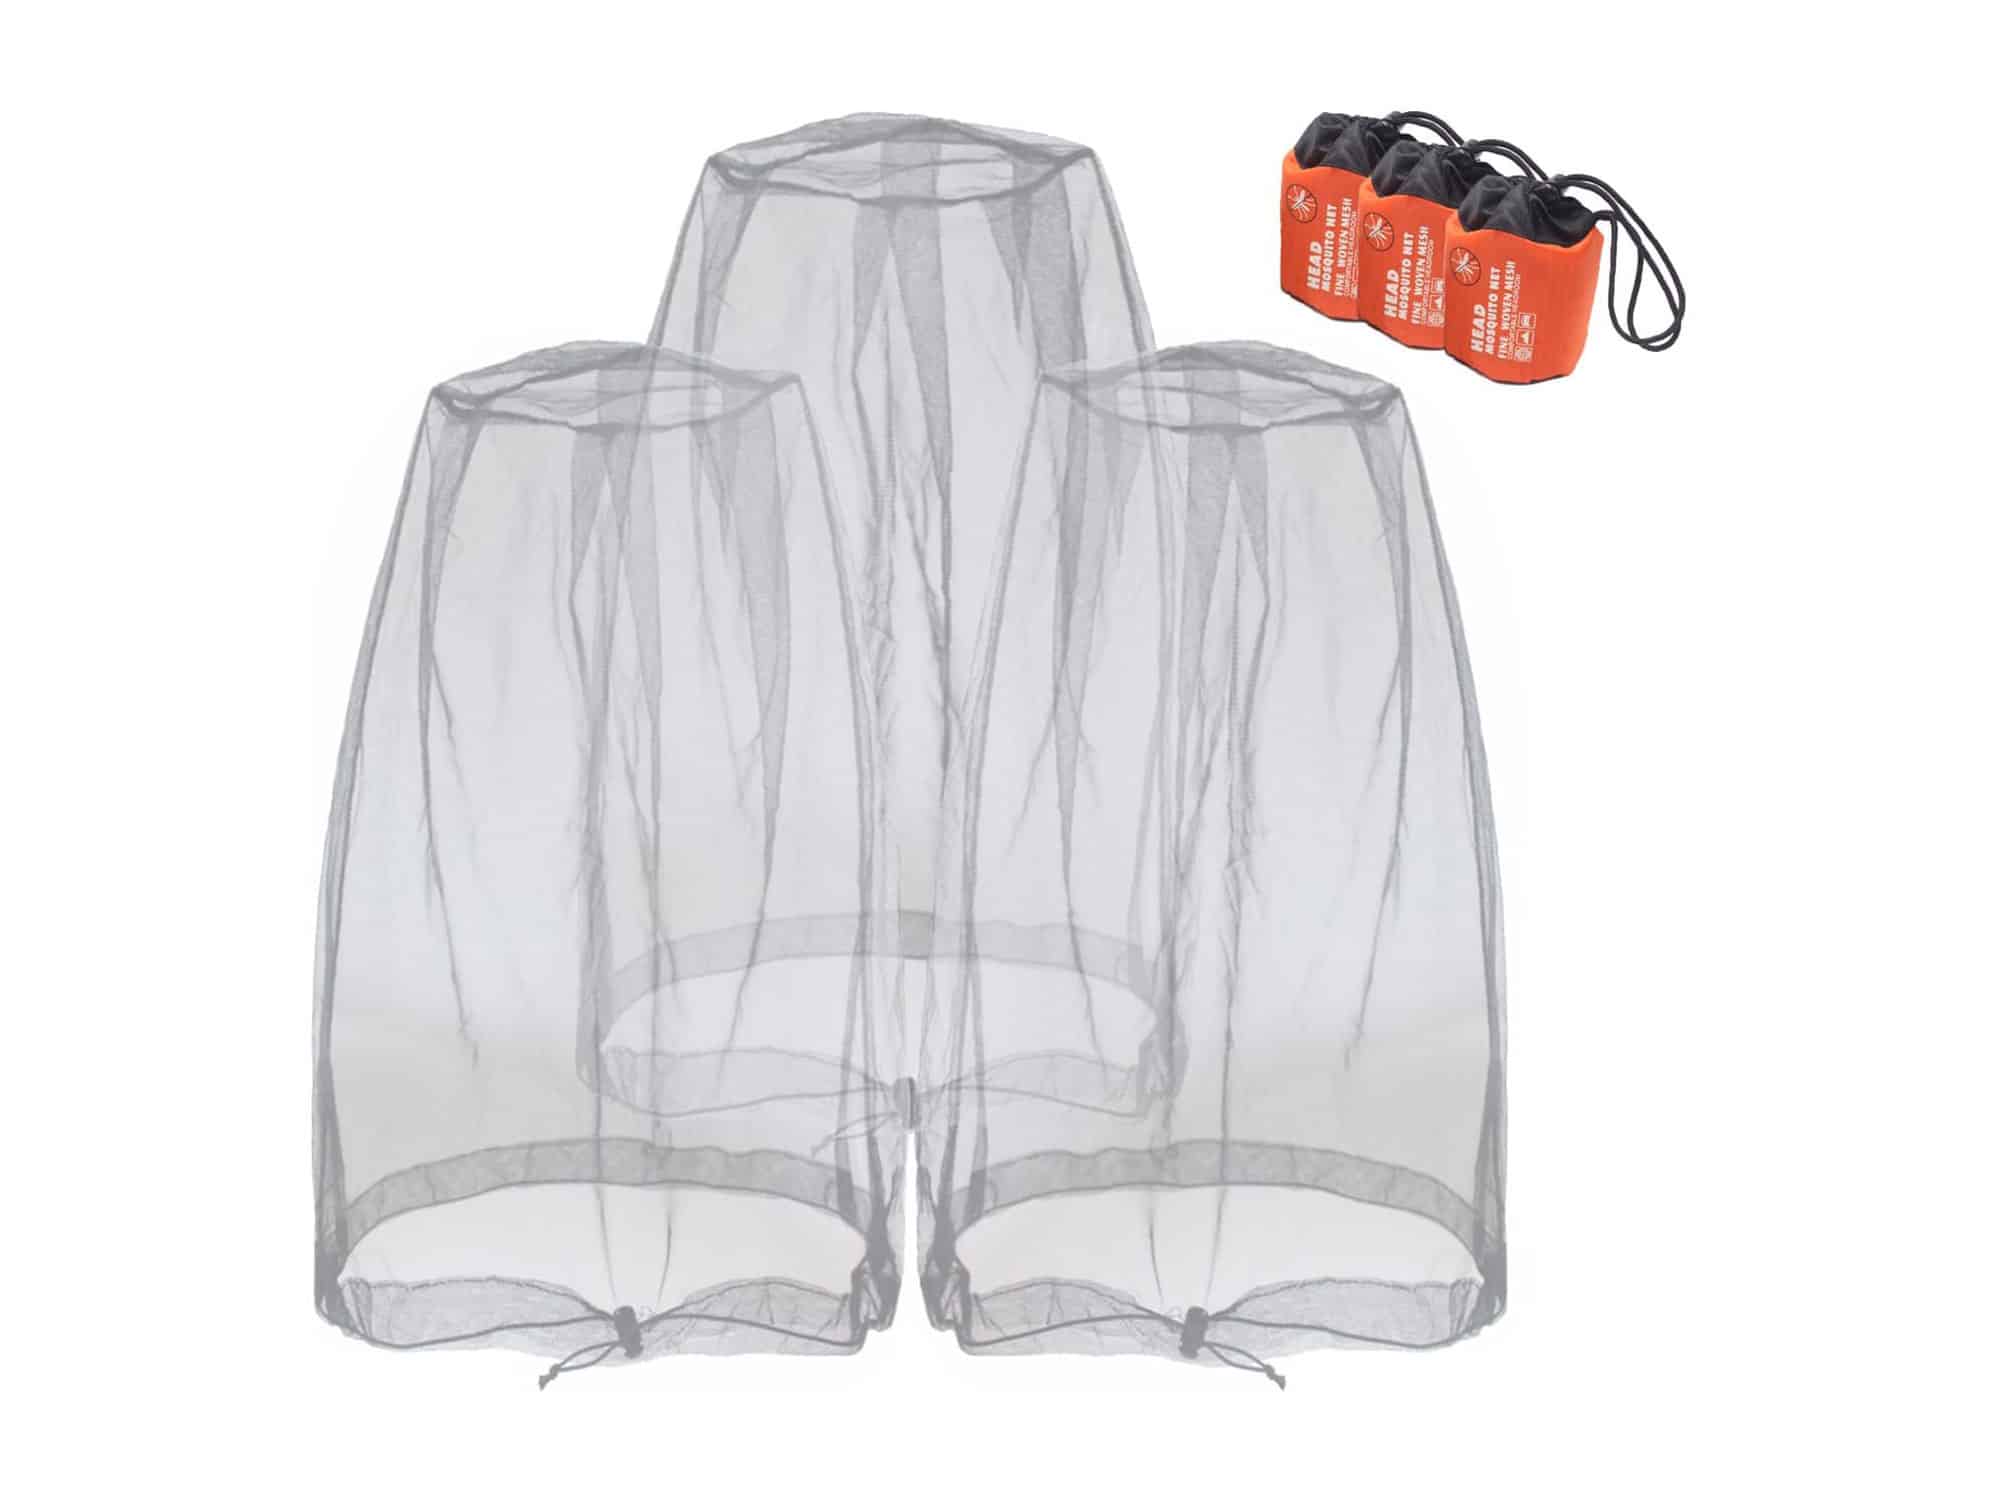 Anvin Mosquito Head Mesh Nets Gnat Face Netting for No See Ums Insects Bugs Gnats Biting Midges from Any Outdoor Activities, Works Over Most Hats Comes with Free Stock Pouches (3pcs, Grey)